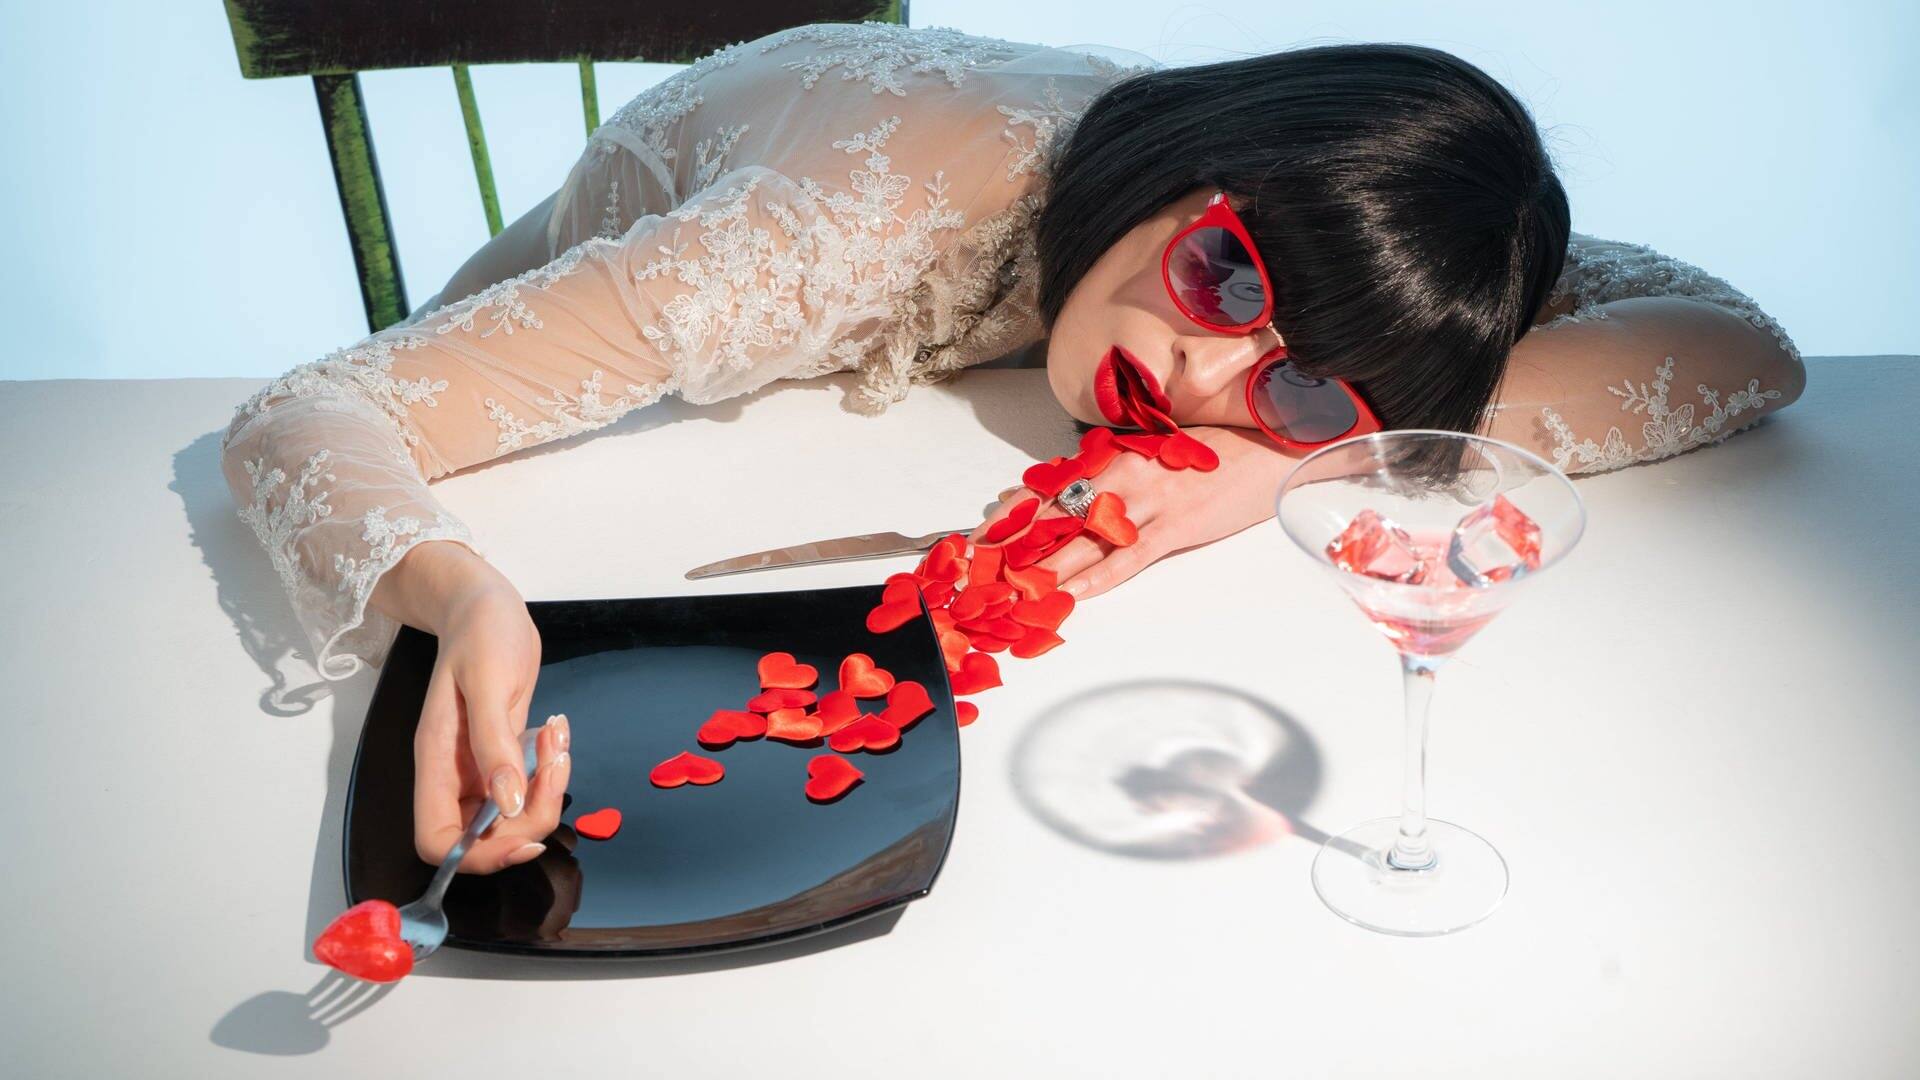 A woman lying at a dining table choking on hearts coming out of her mouth (Photo: Adobe Stock/razoomanetu)